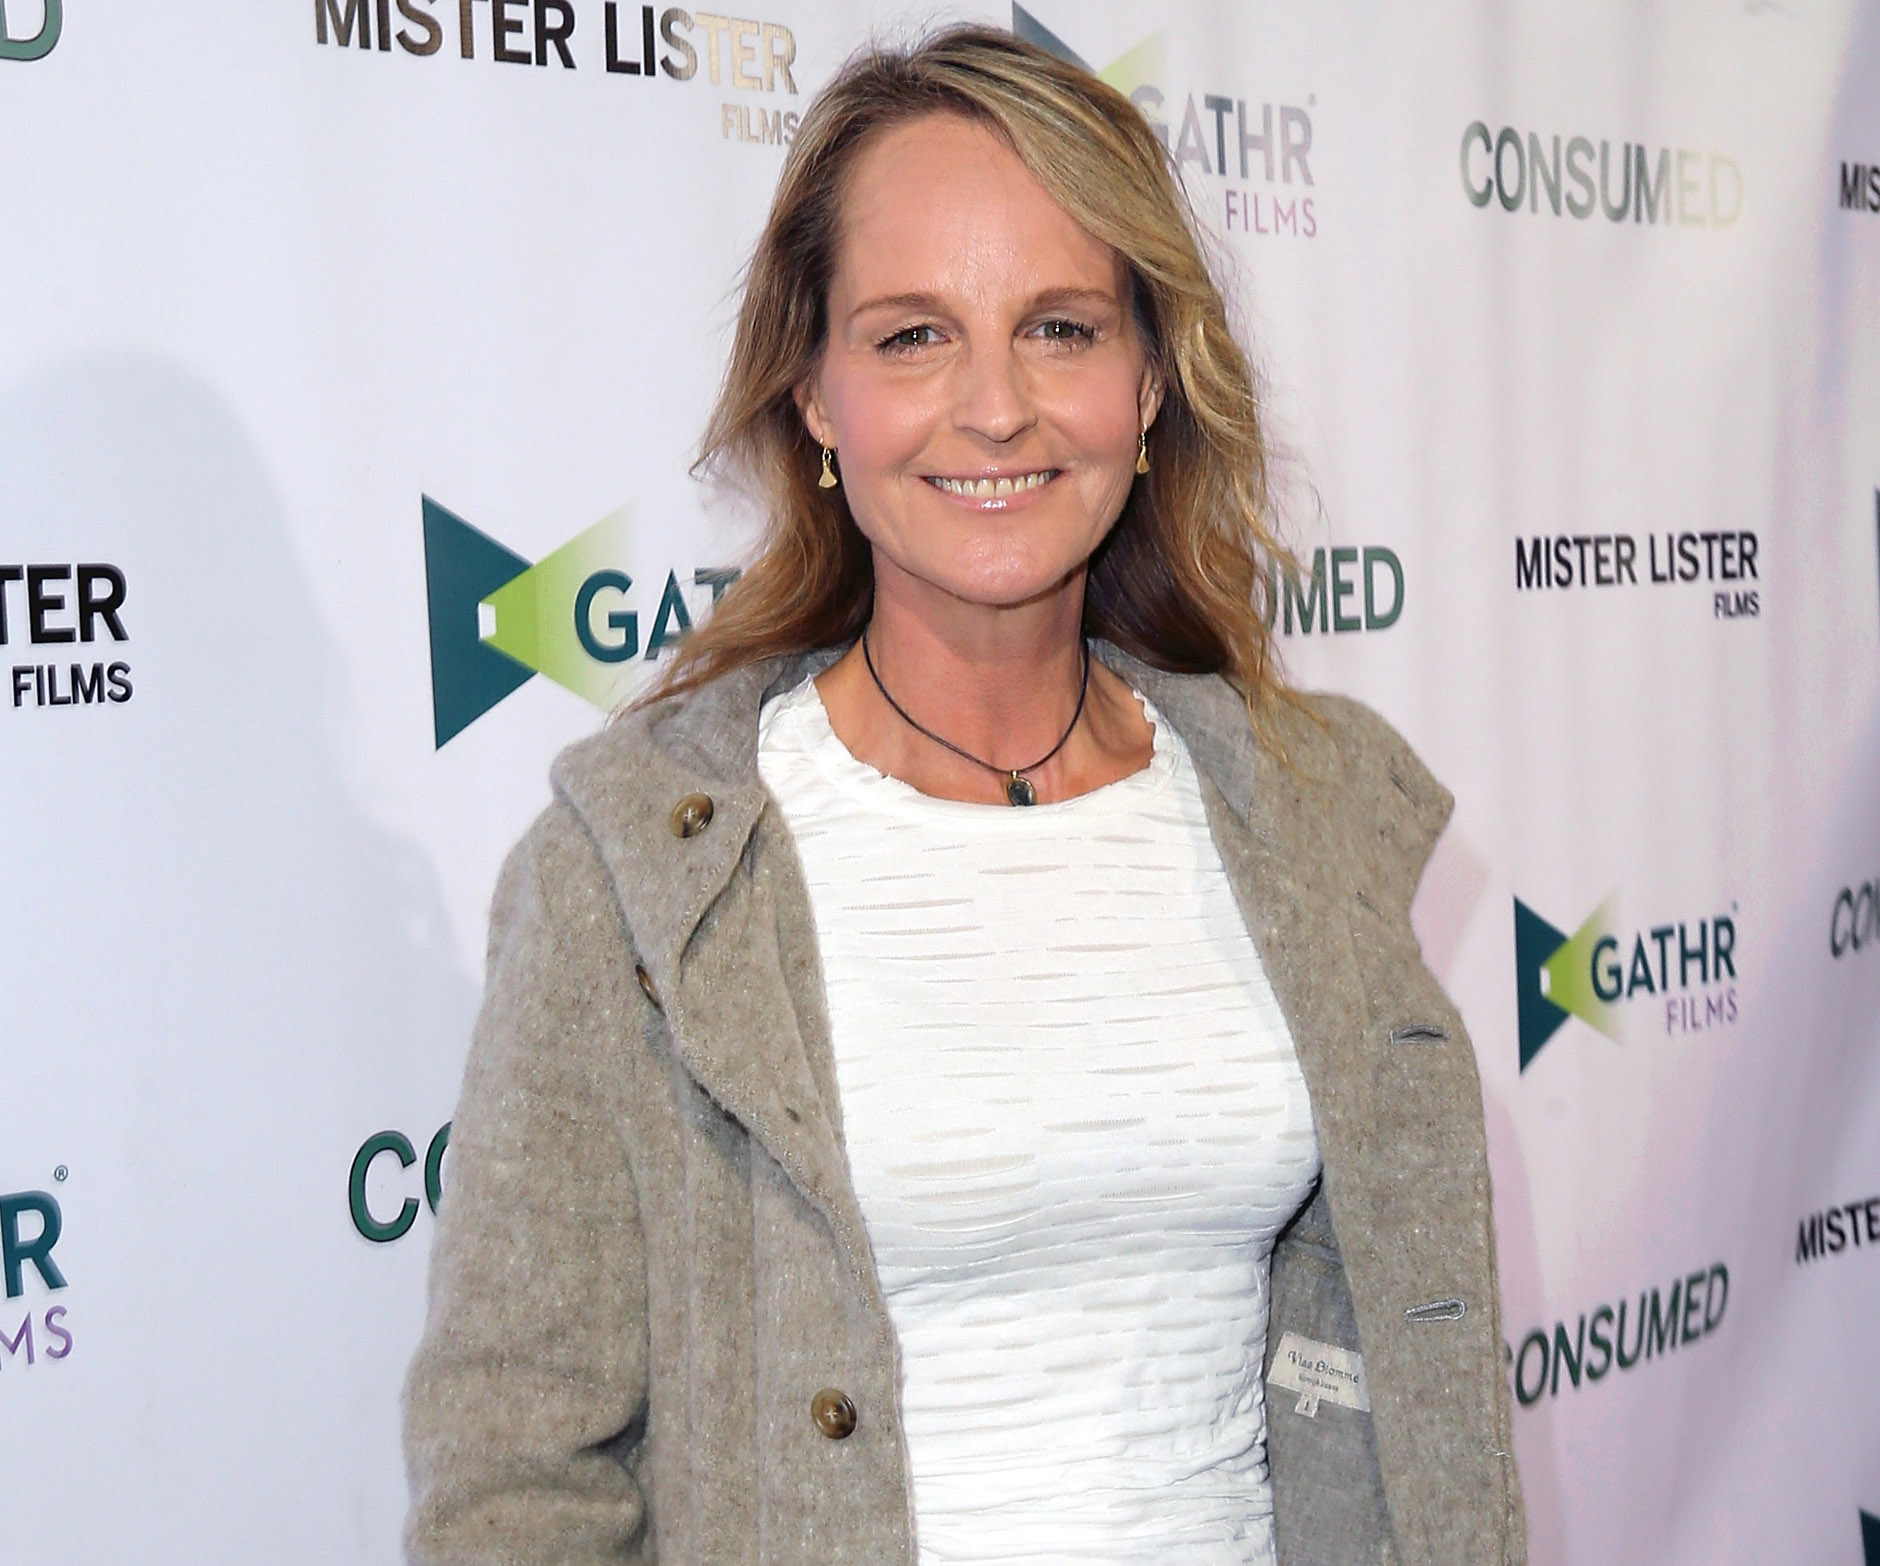 Helen Hunt was mistaken for another famous actor at Starbucks